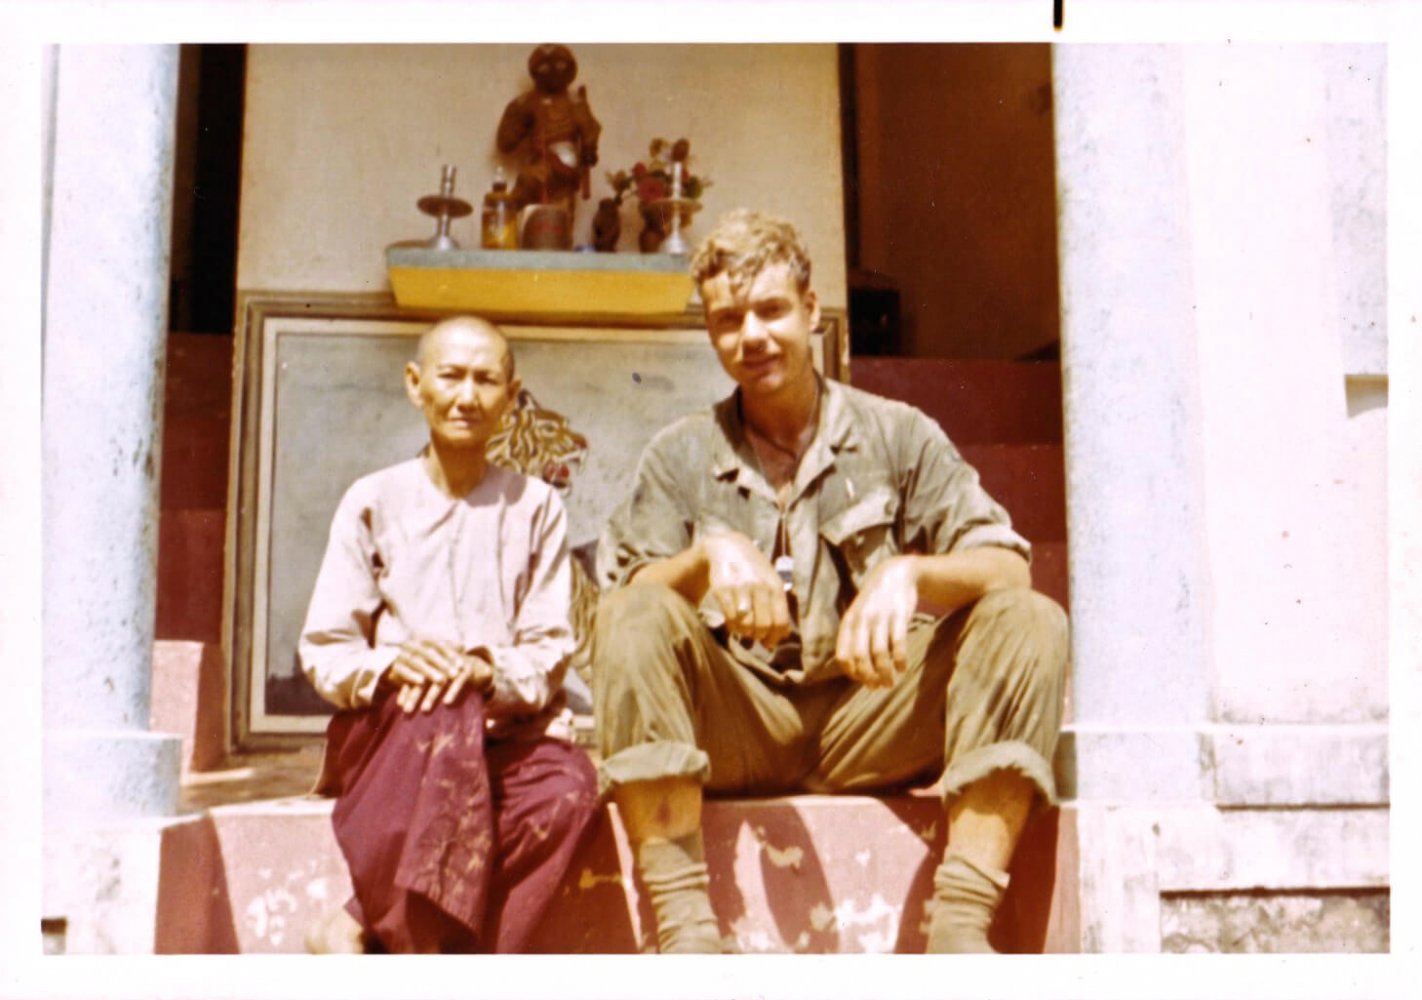 A young soldier sitting next to a smaller Asian man, on steps outside of a building.